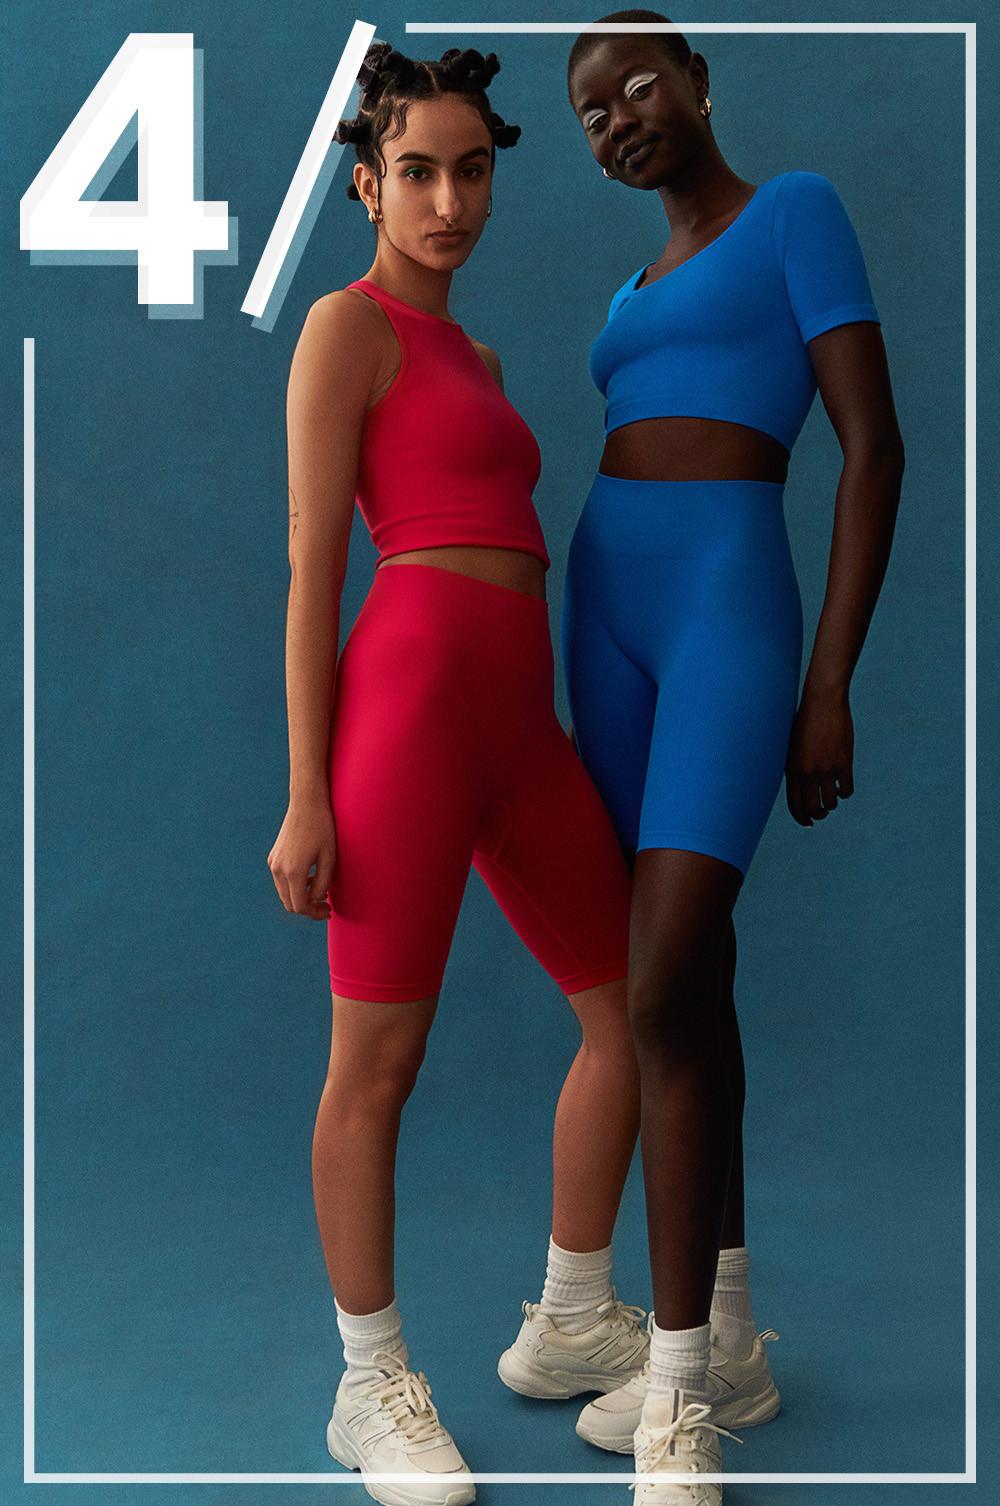 Models wearing seamless sets in red and blue